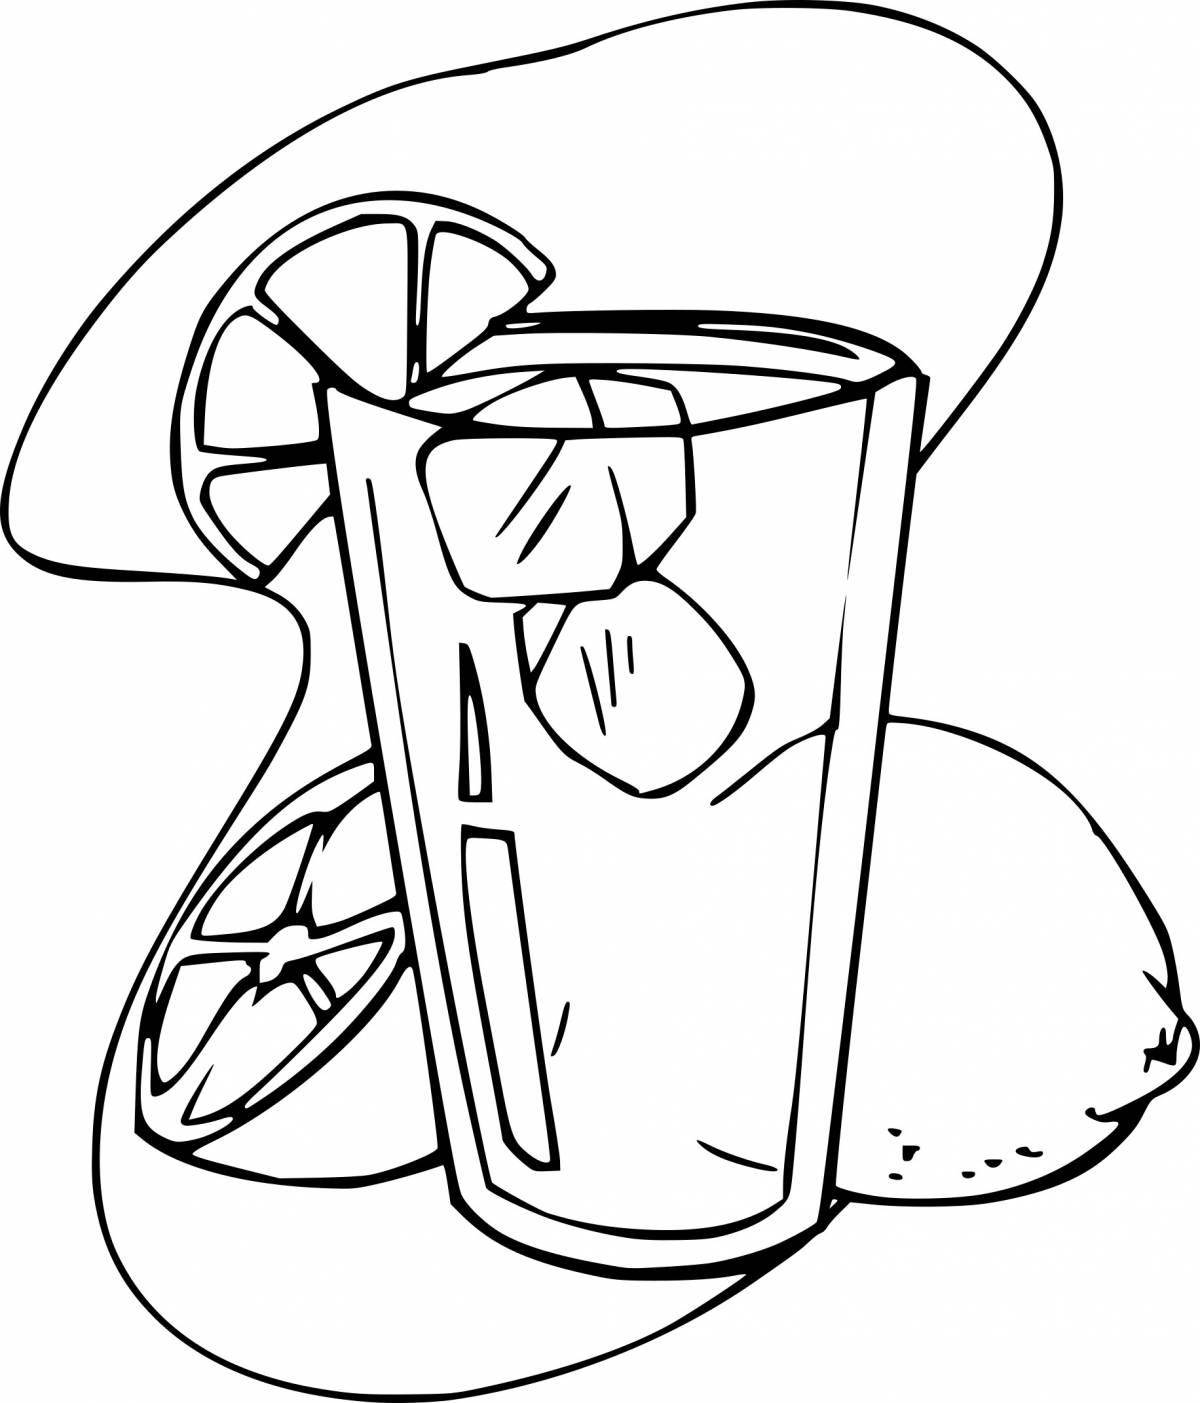 Coloring page of a refreshing drink